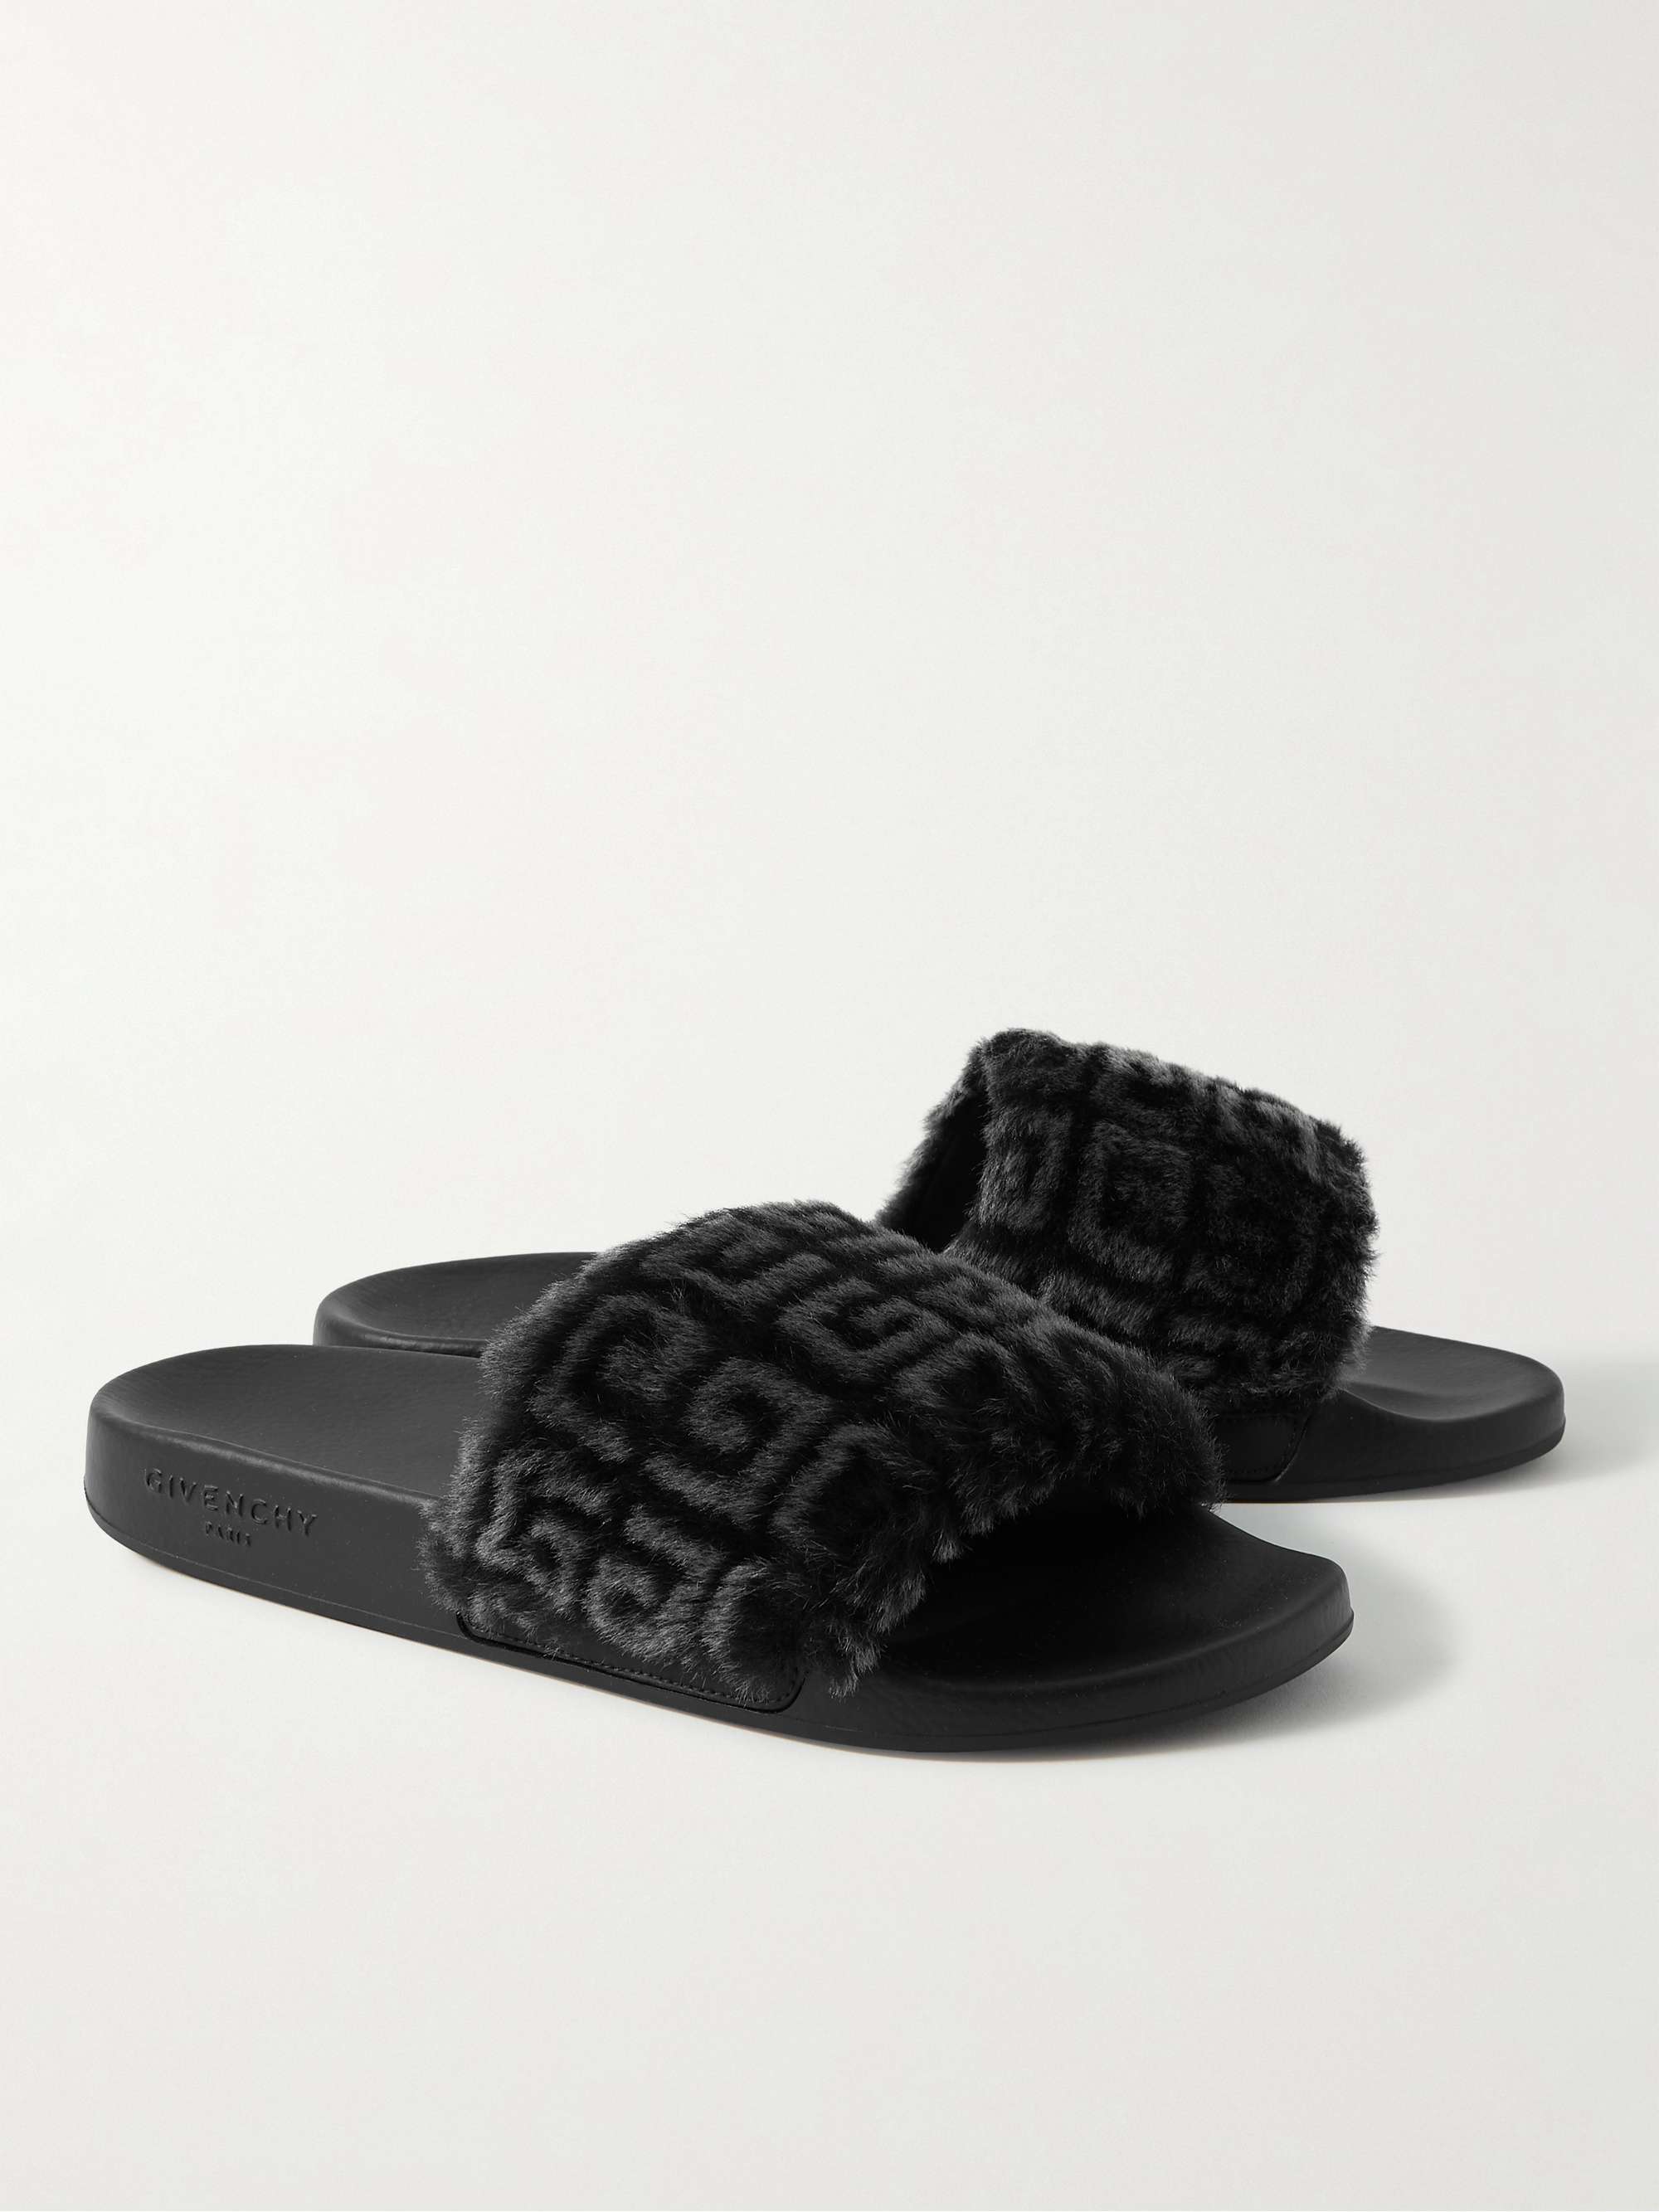 GIVENCHY Printed Shearling and Rubber Slides